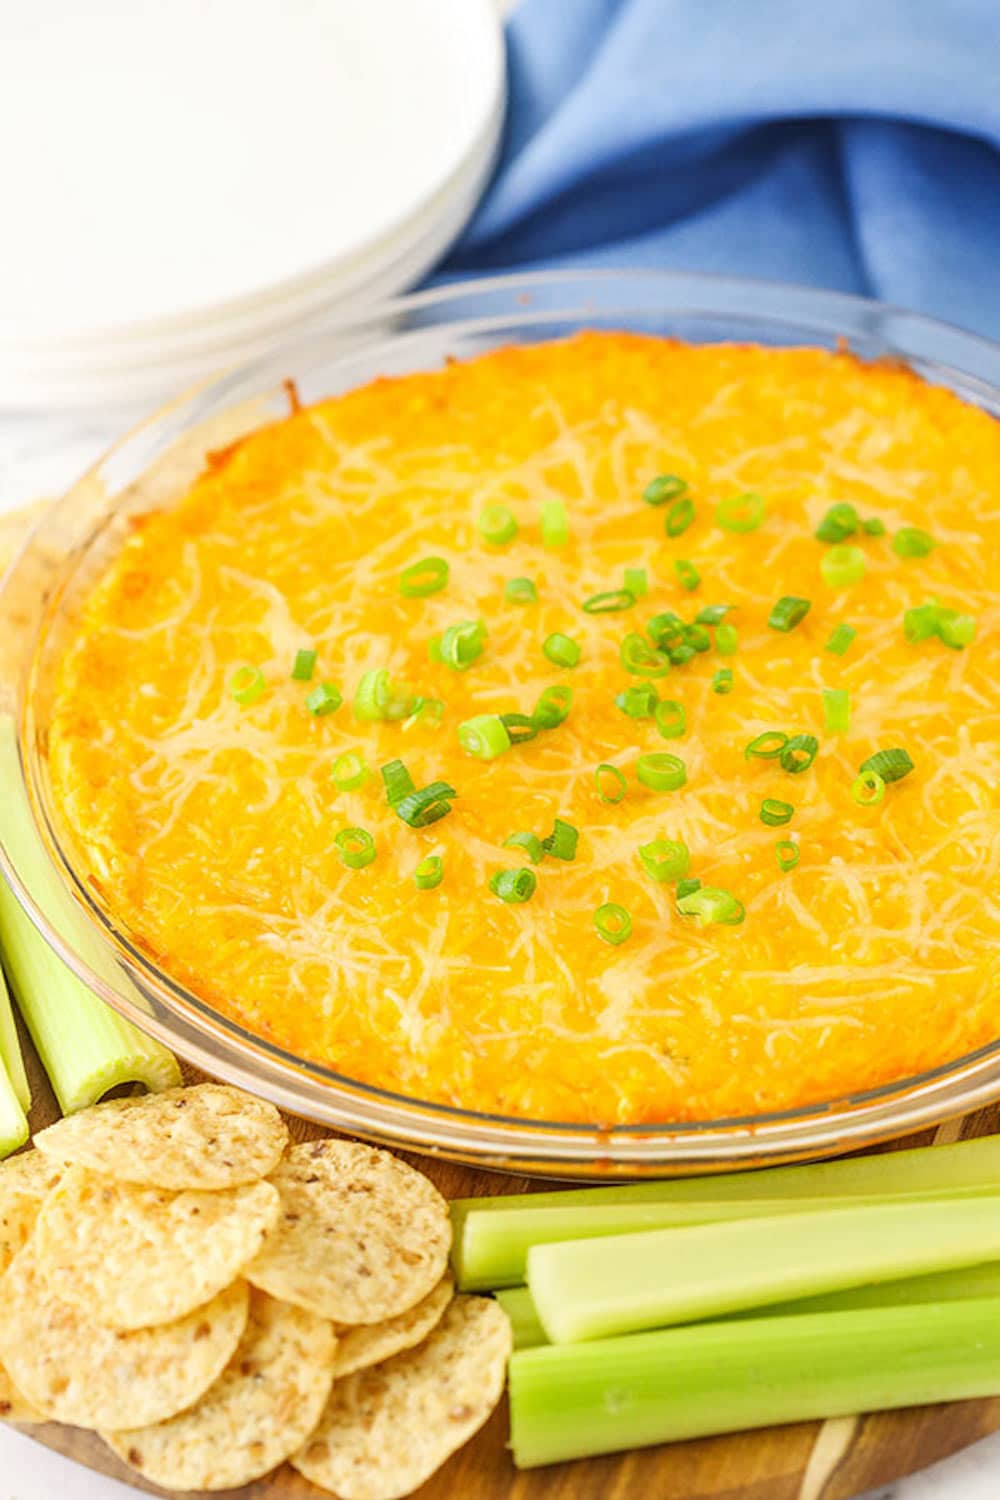 A Bowl of Buffalo Chicken Dip Beside a Pile of Crackers and a Stack of Celery.